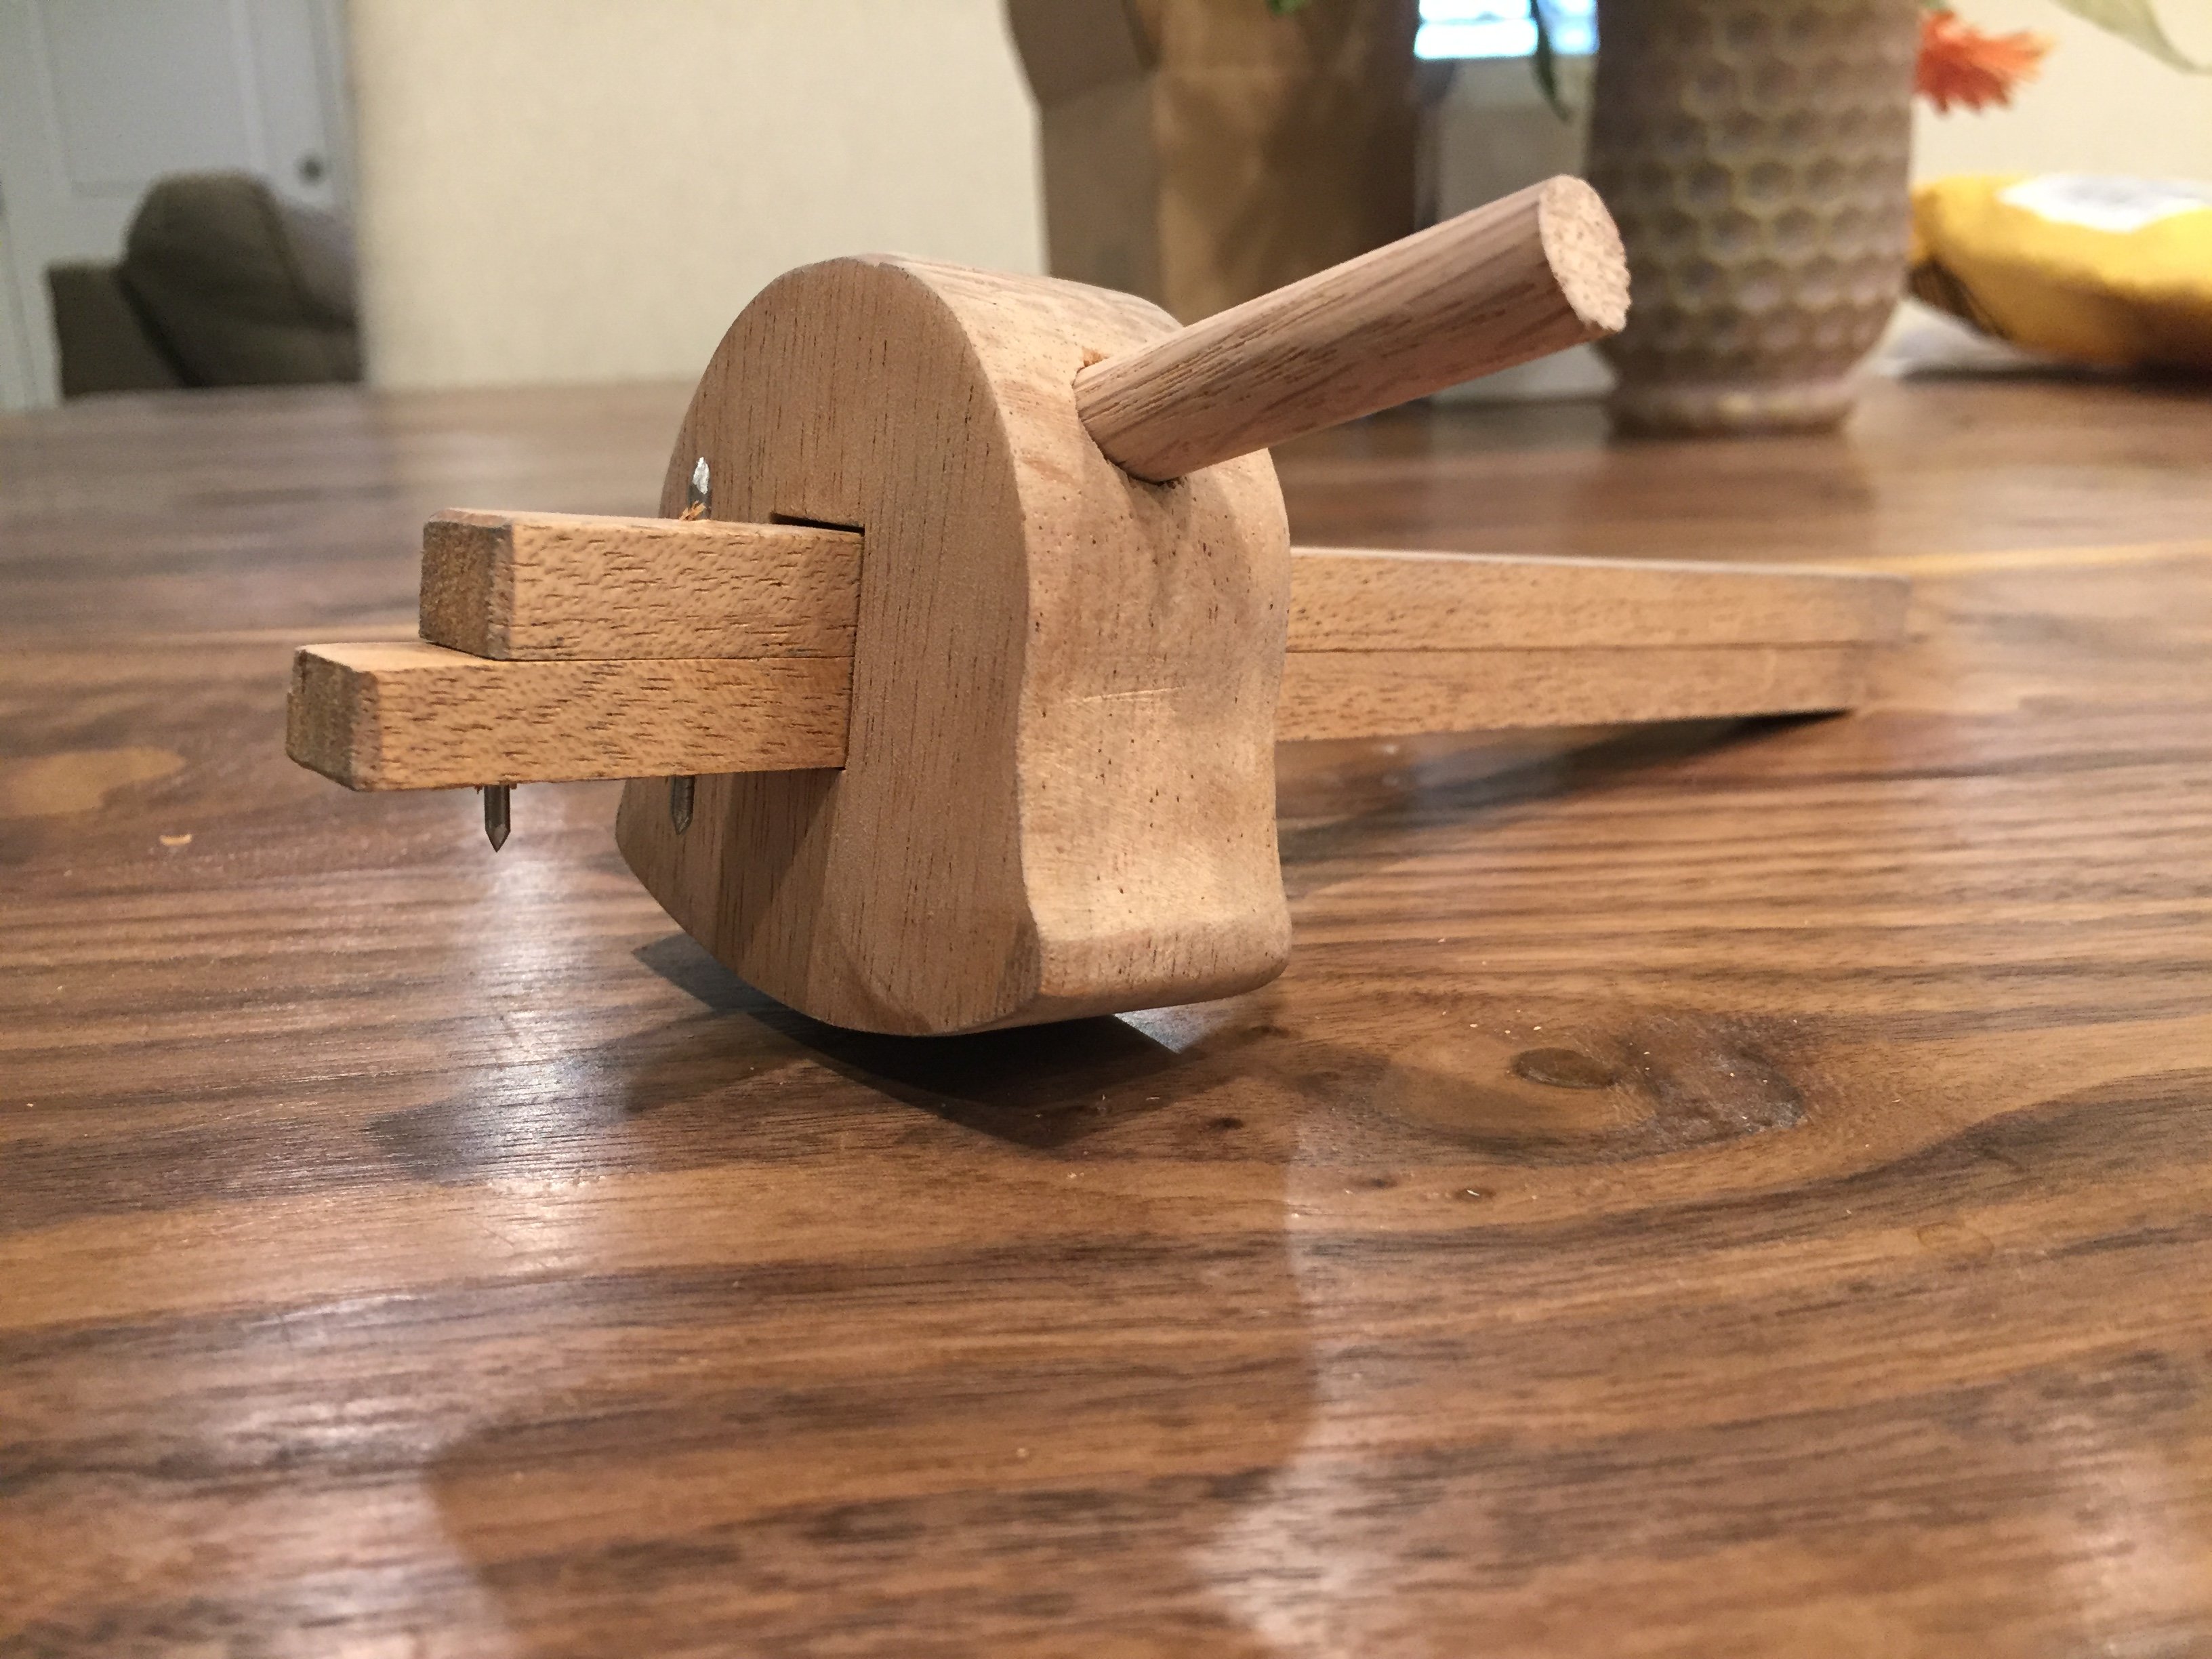 Mortise Gauge by C.J. Cole